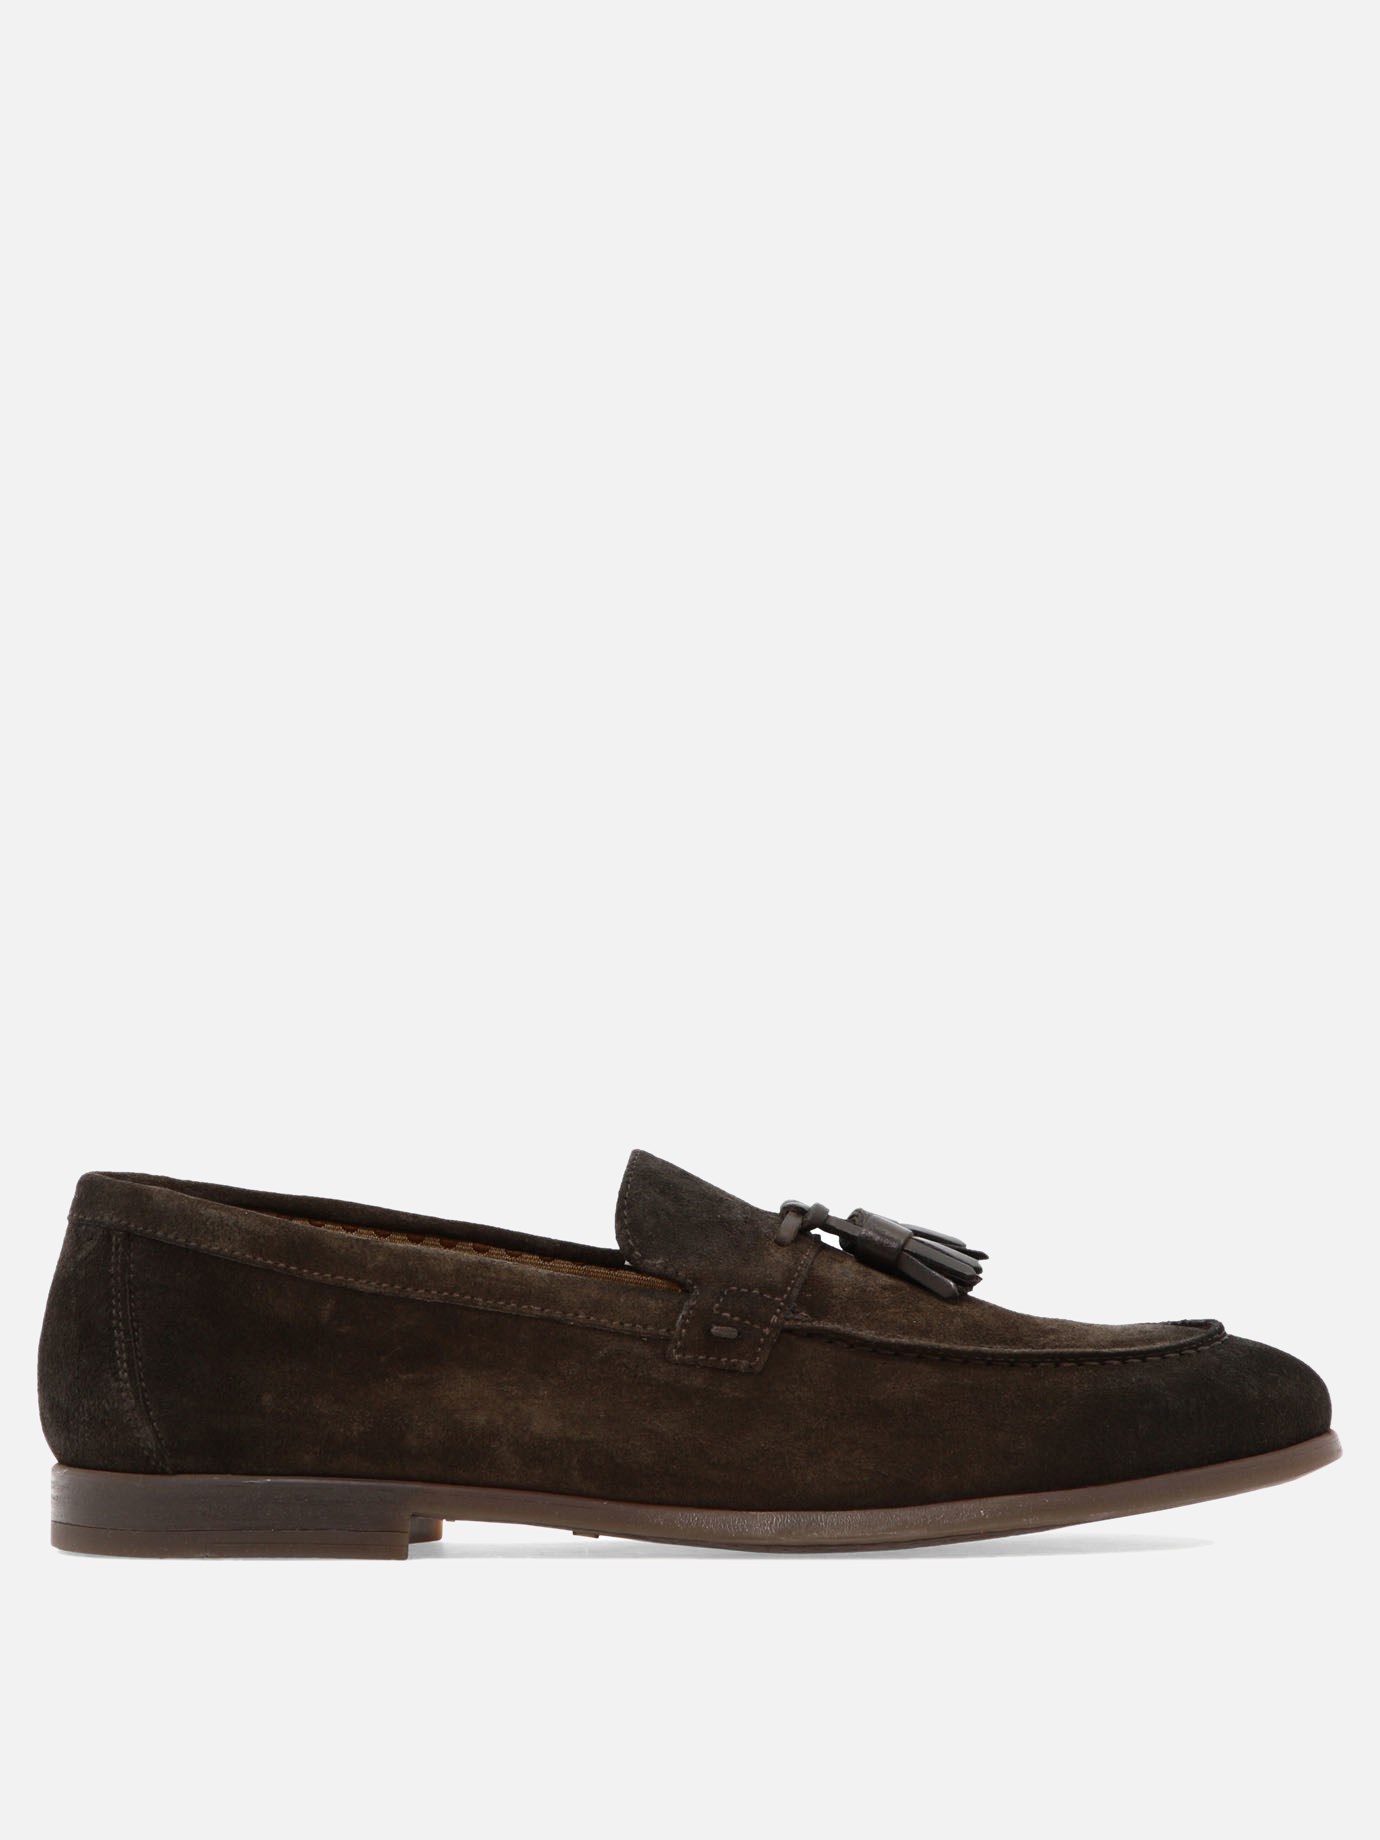 Loafers with tassels by Doucal's